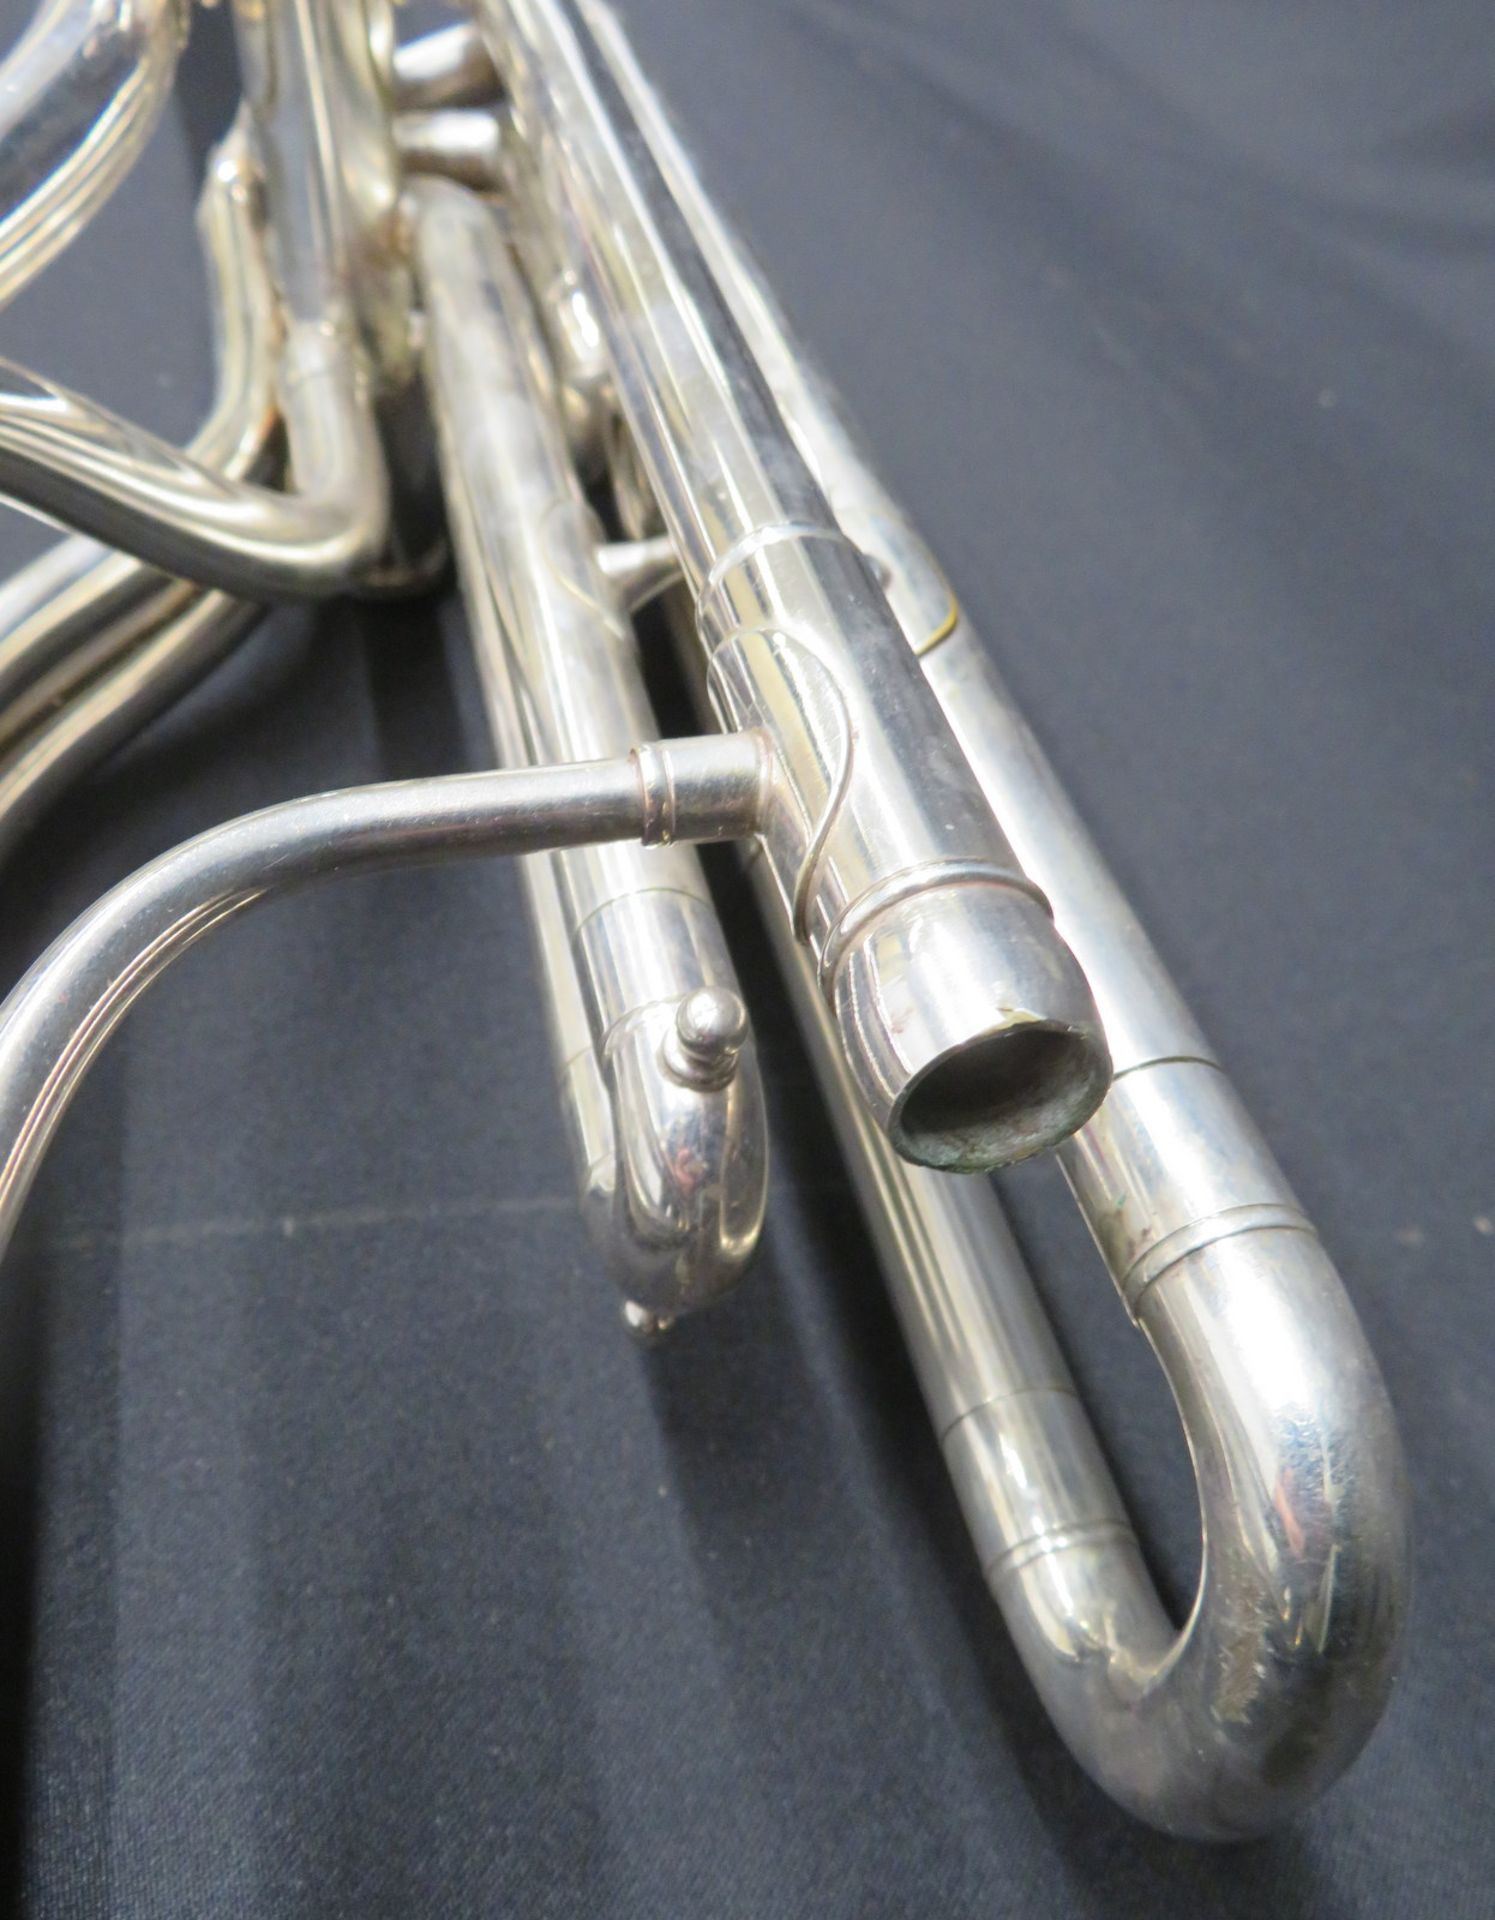 Boosey & Hawkes Imperial Besson bass fanfare trumpet with case. Serial number: 708-670089. - Image 12 of 18